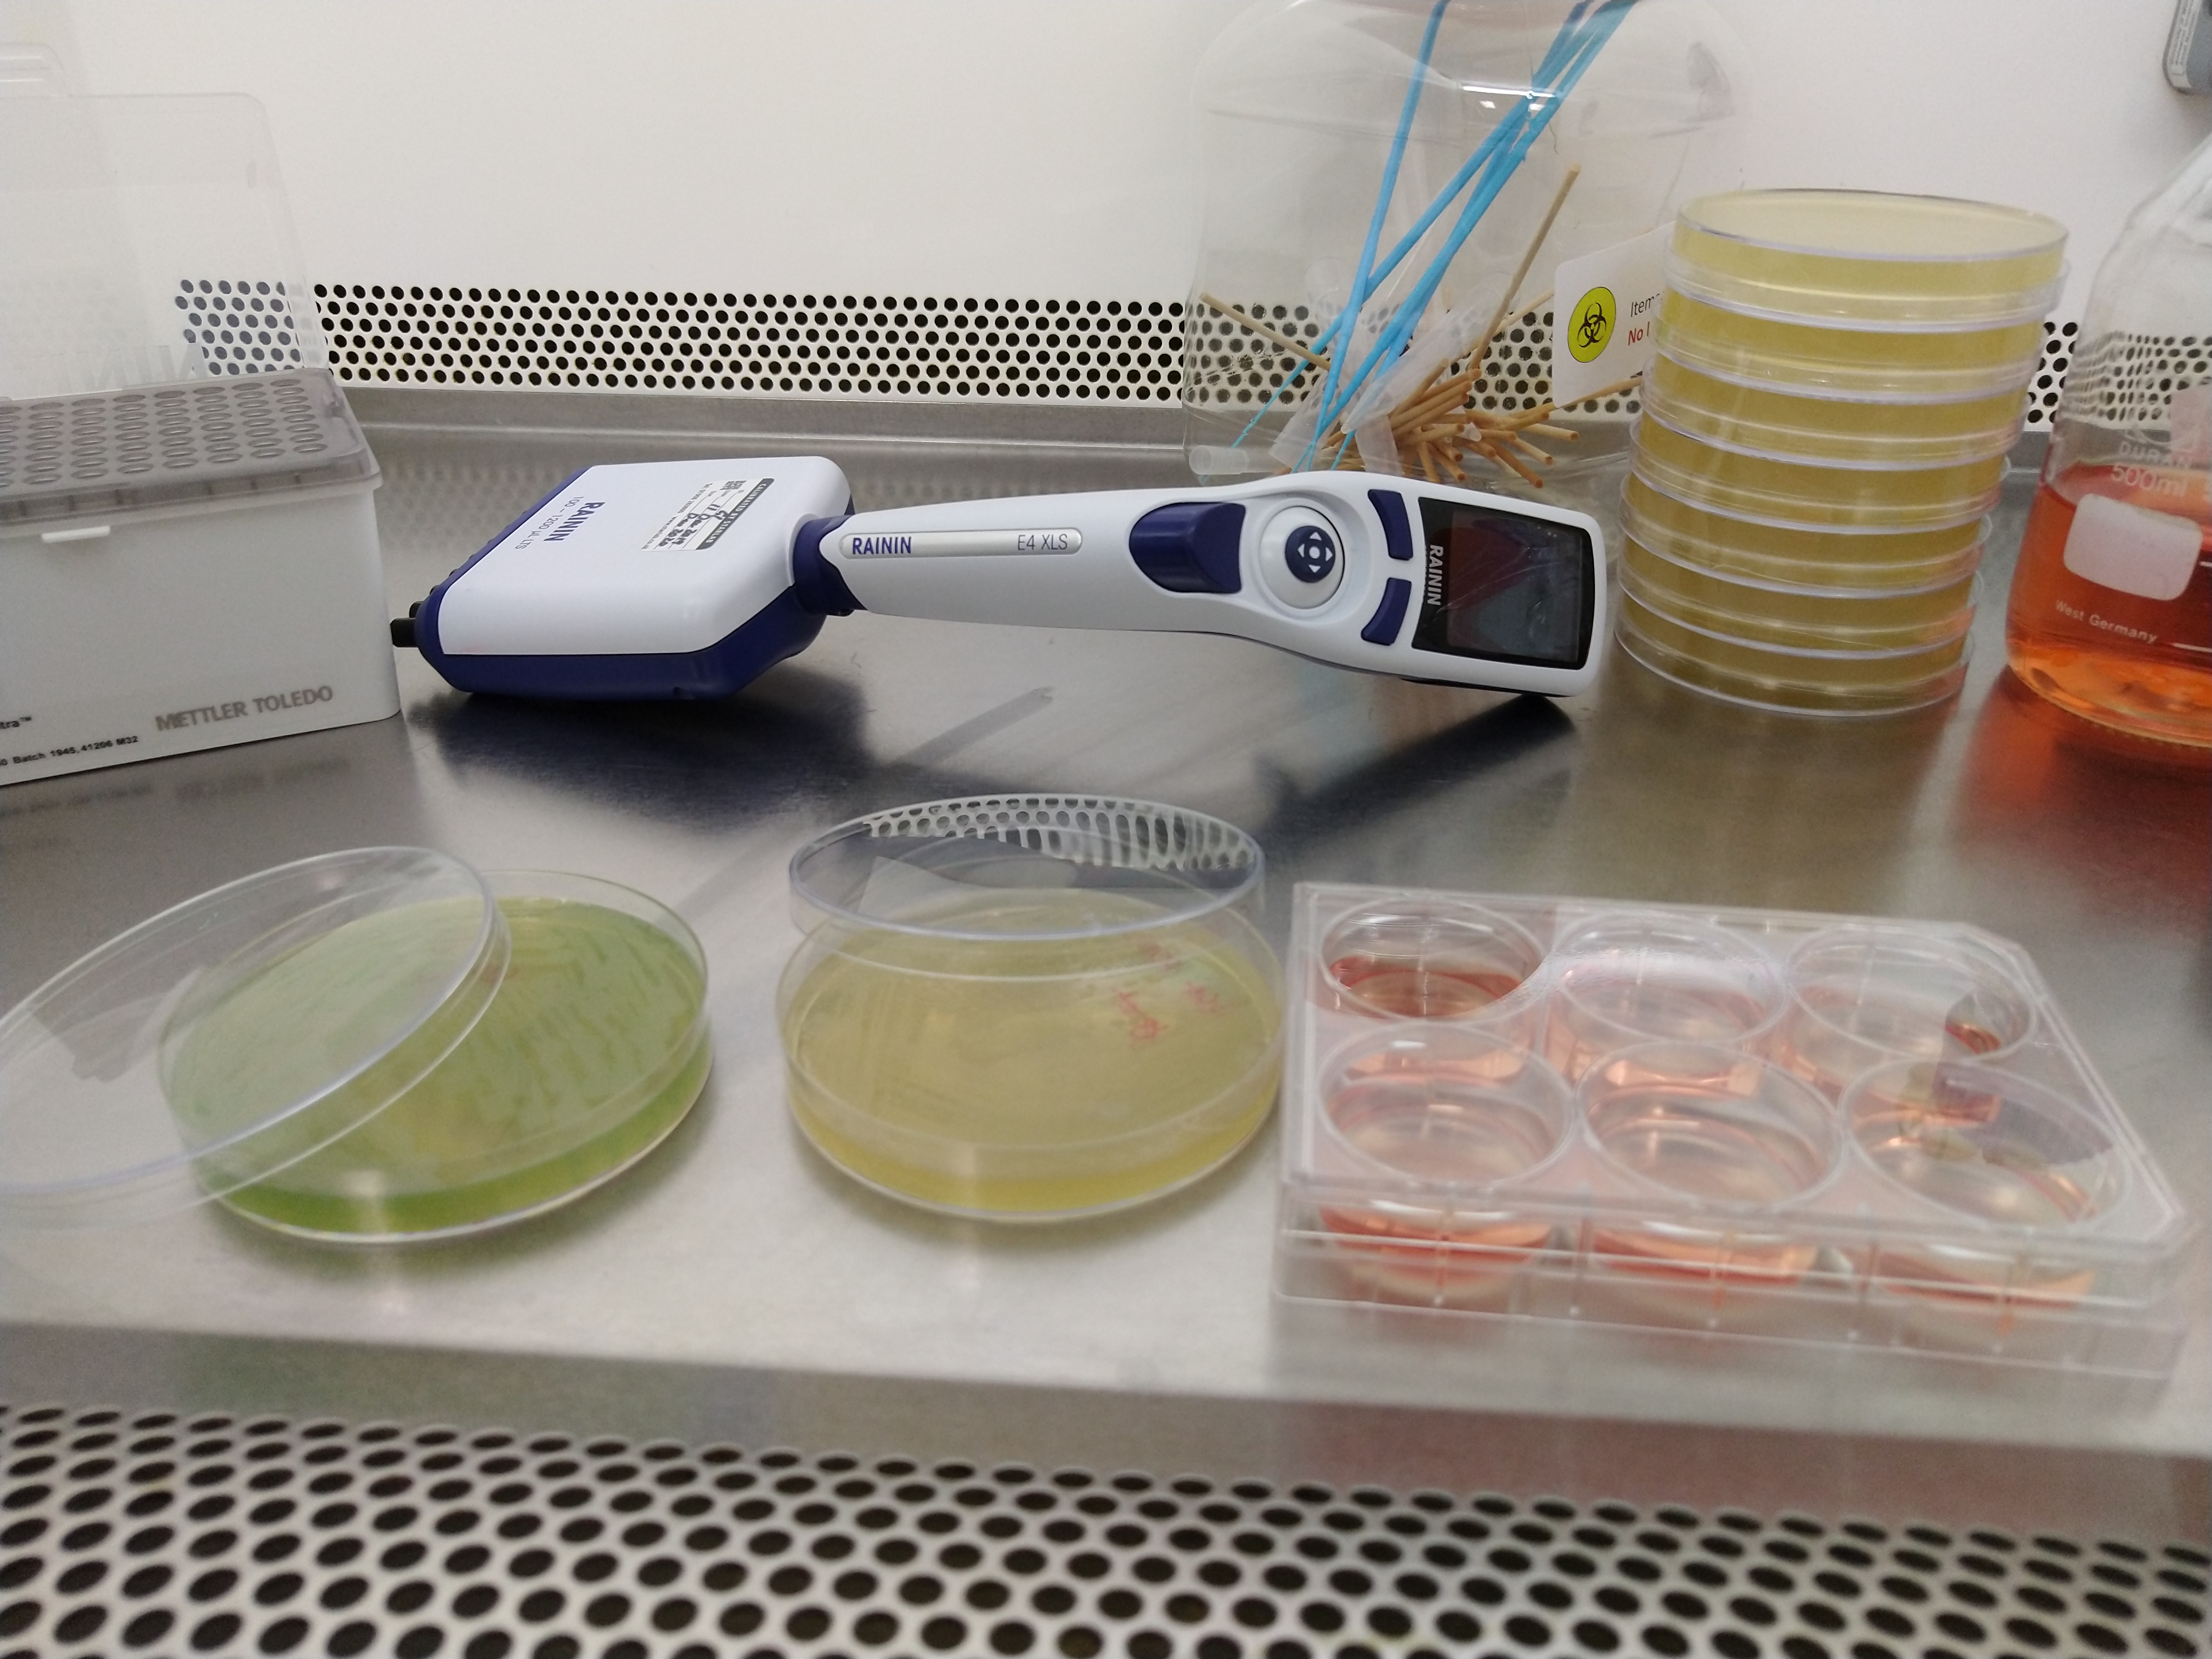 Two agar plates and a 6 well culture plate in the foreground with a pipette and stack of agar plates in the background